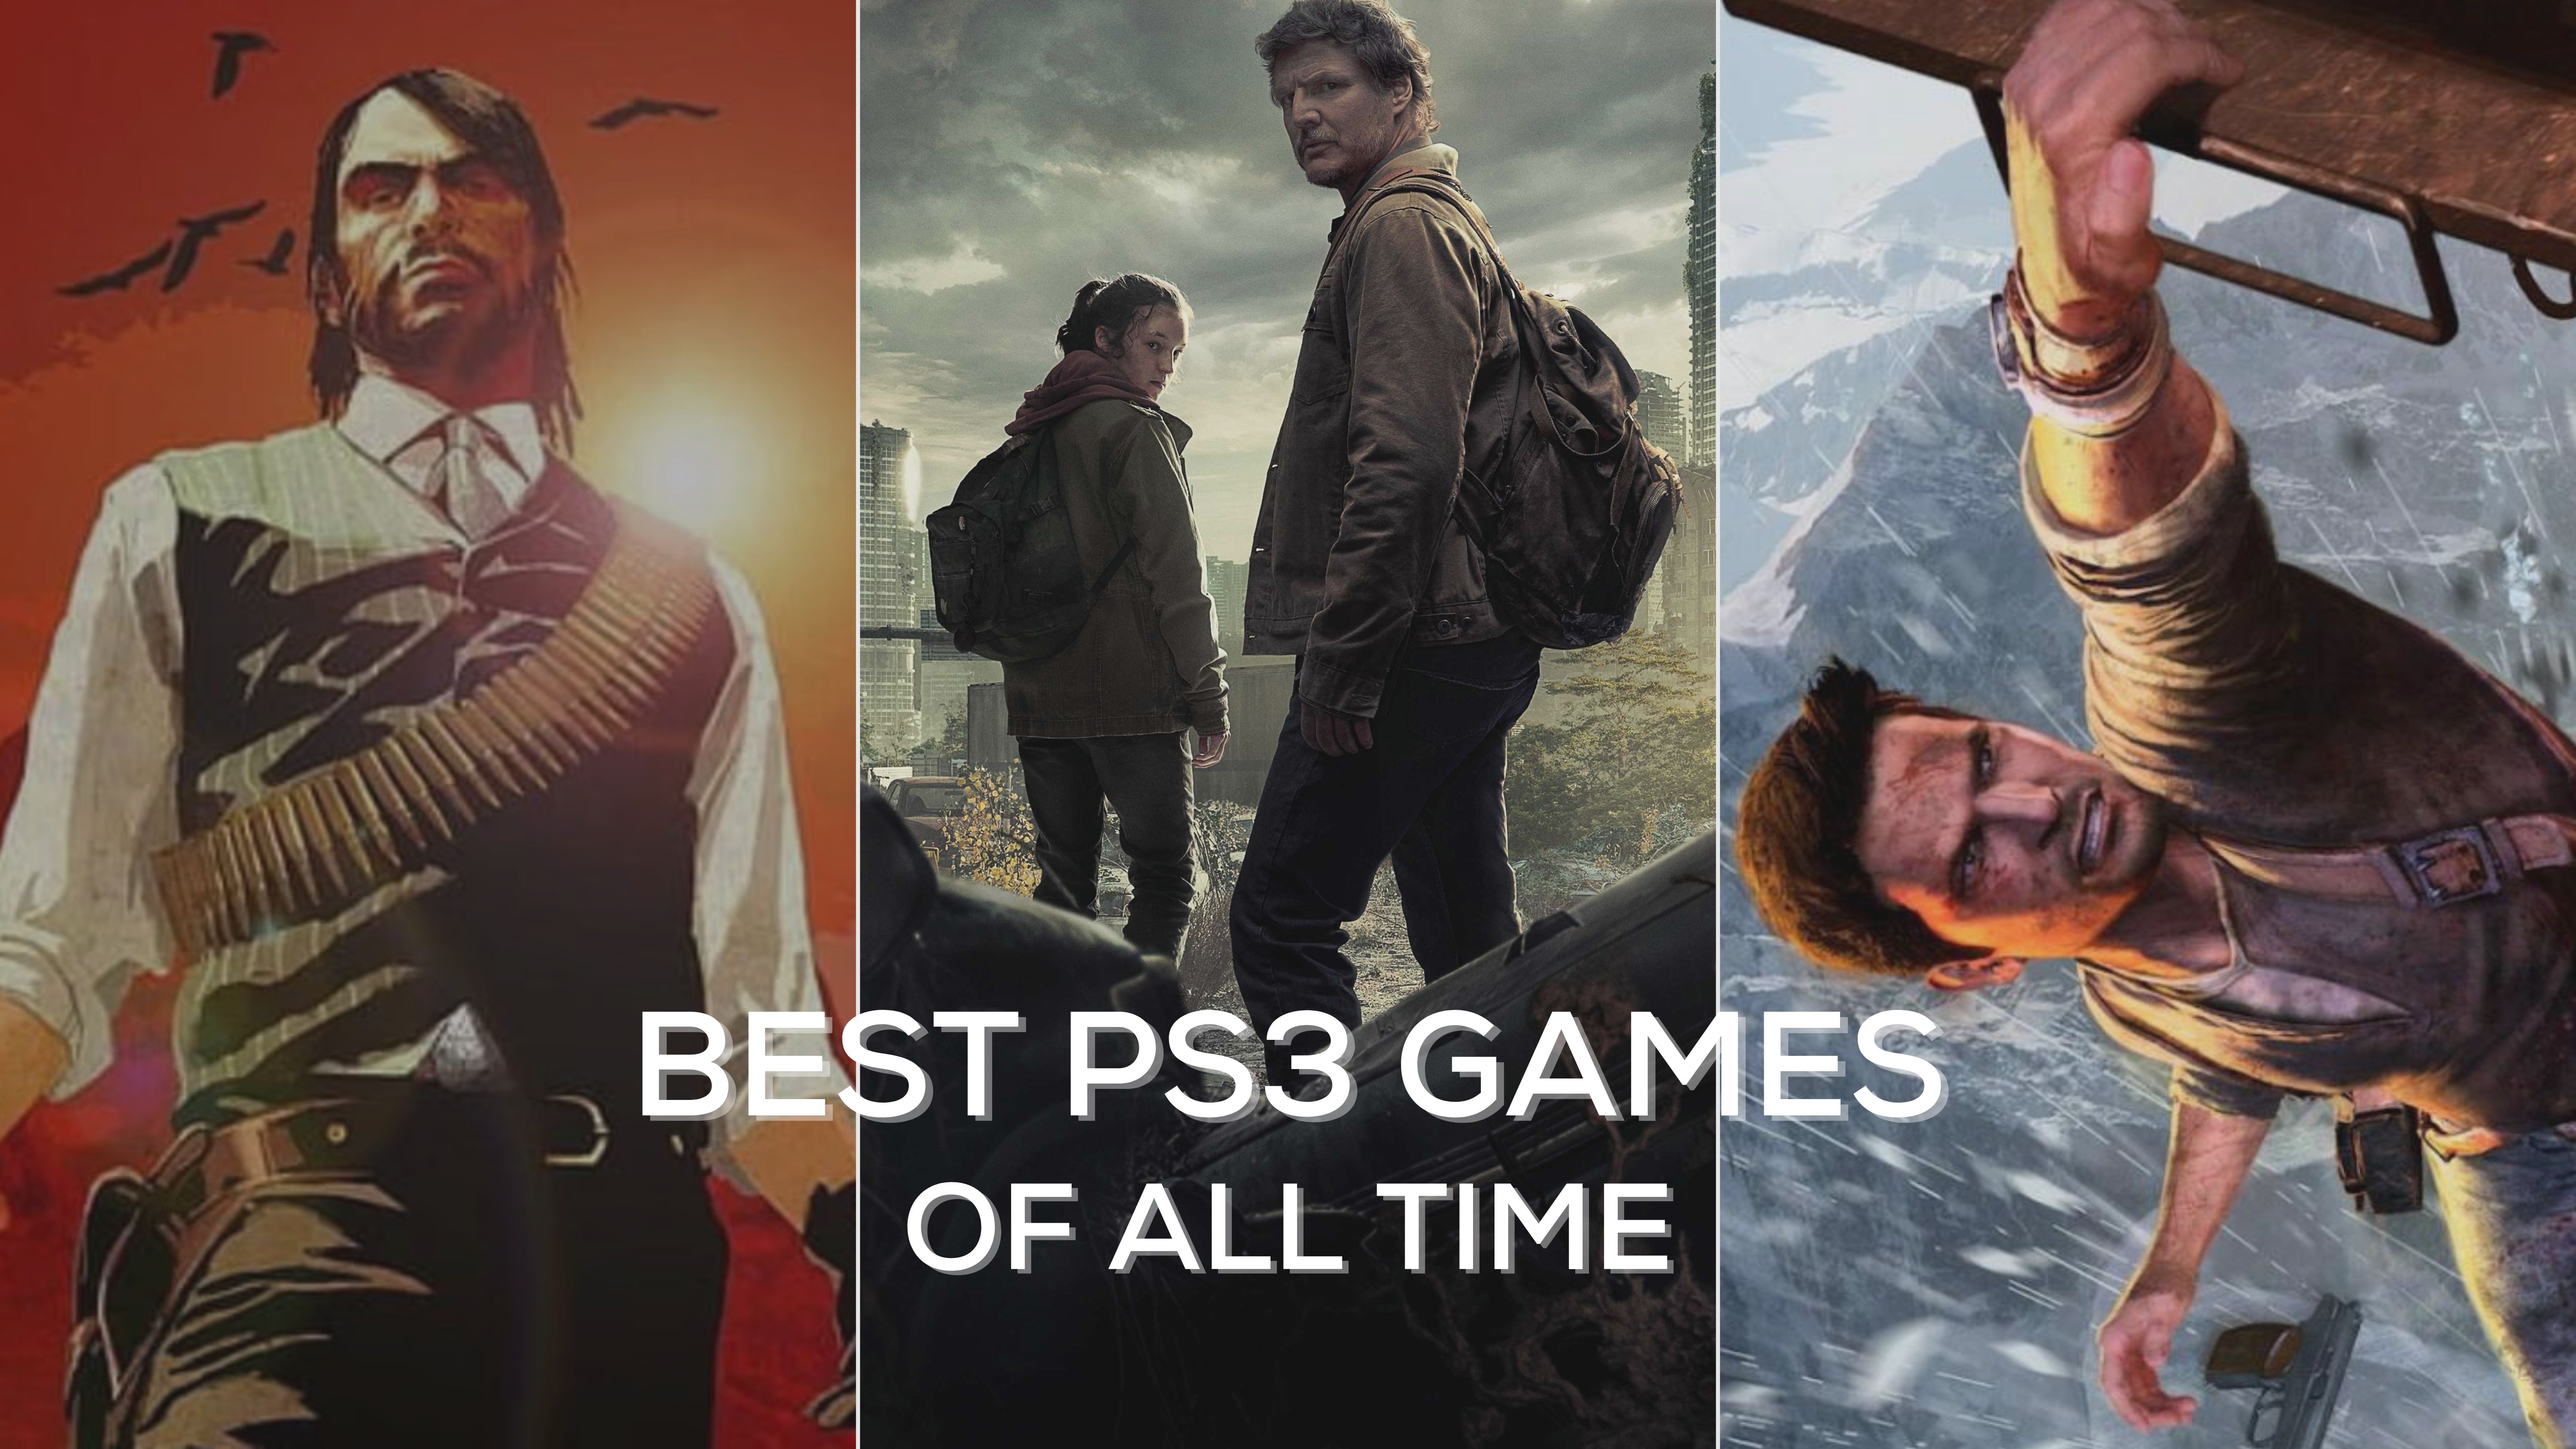 Top 5 Best PS3 Games of All Time